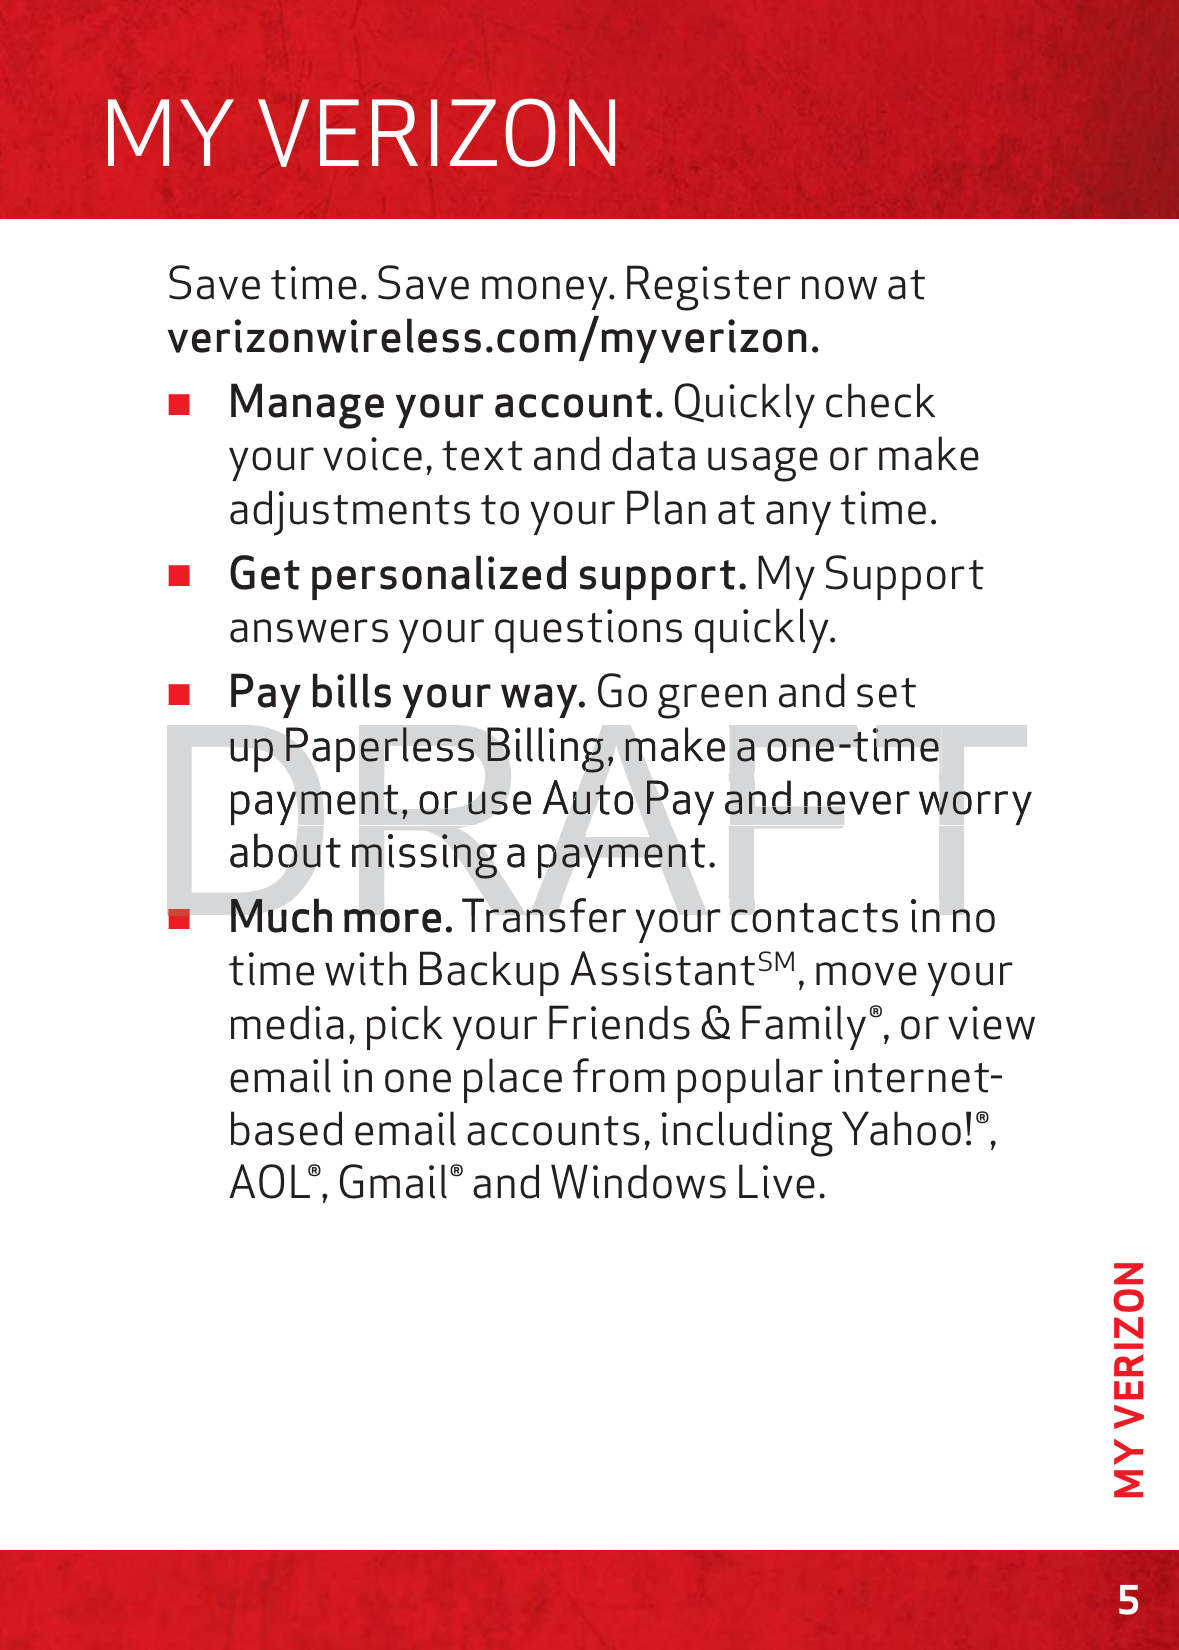 5MY VERIZONSave time. Save money. Register now at verizonwireless.com/myverizon. ≠Manage your account. Quickly check your voice, text and data usage or make adjustments to your Plan at any time. ≠Get personalized support. My Support answers your questions quickly. ≠Pay bills your way. Go green and set up Paperless Billing, make a one-time payment, or use Auto Pay and never worry about missing a payment. ≠Much more. Transfer your contacts in no time with Backup AssistantSM, move your media, pick your Friends &amp; Family®, or view email in one place from popular internet-based email accounts, including Yahoo!®, AOL®, Gmail® and Windows Live.MY VERIZONDRAFTup Paperless Billing, make a one-time up Paperless Billing, make a one-time payment, or useyment, or usAAuto Puto Pay and never worryand never woabout missing a payment.out missing a payment≠≠Much moreMuch moTransfer your contacts in noransferyourcontactsinn